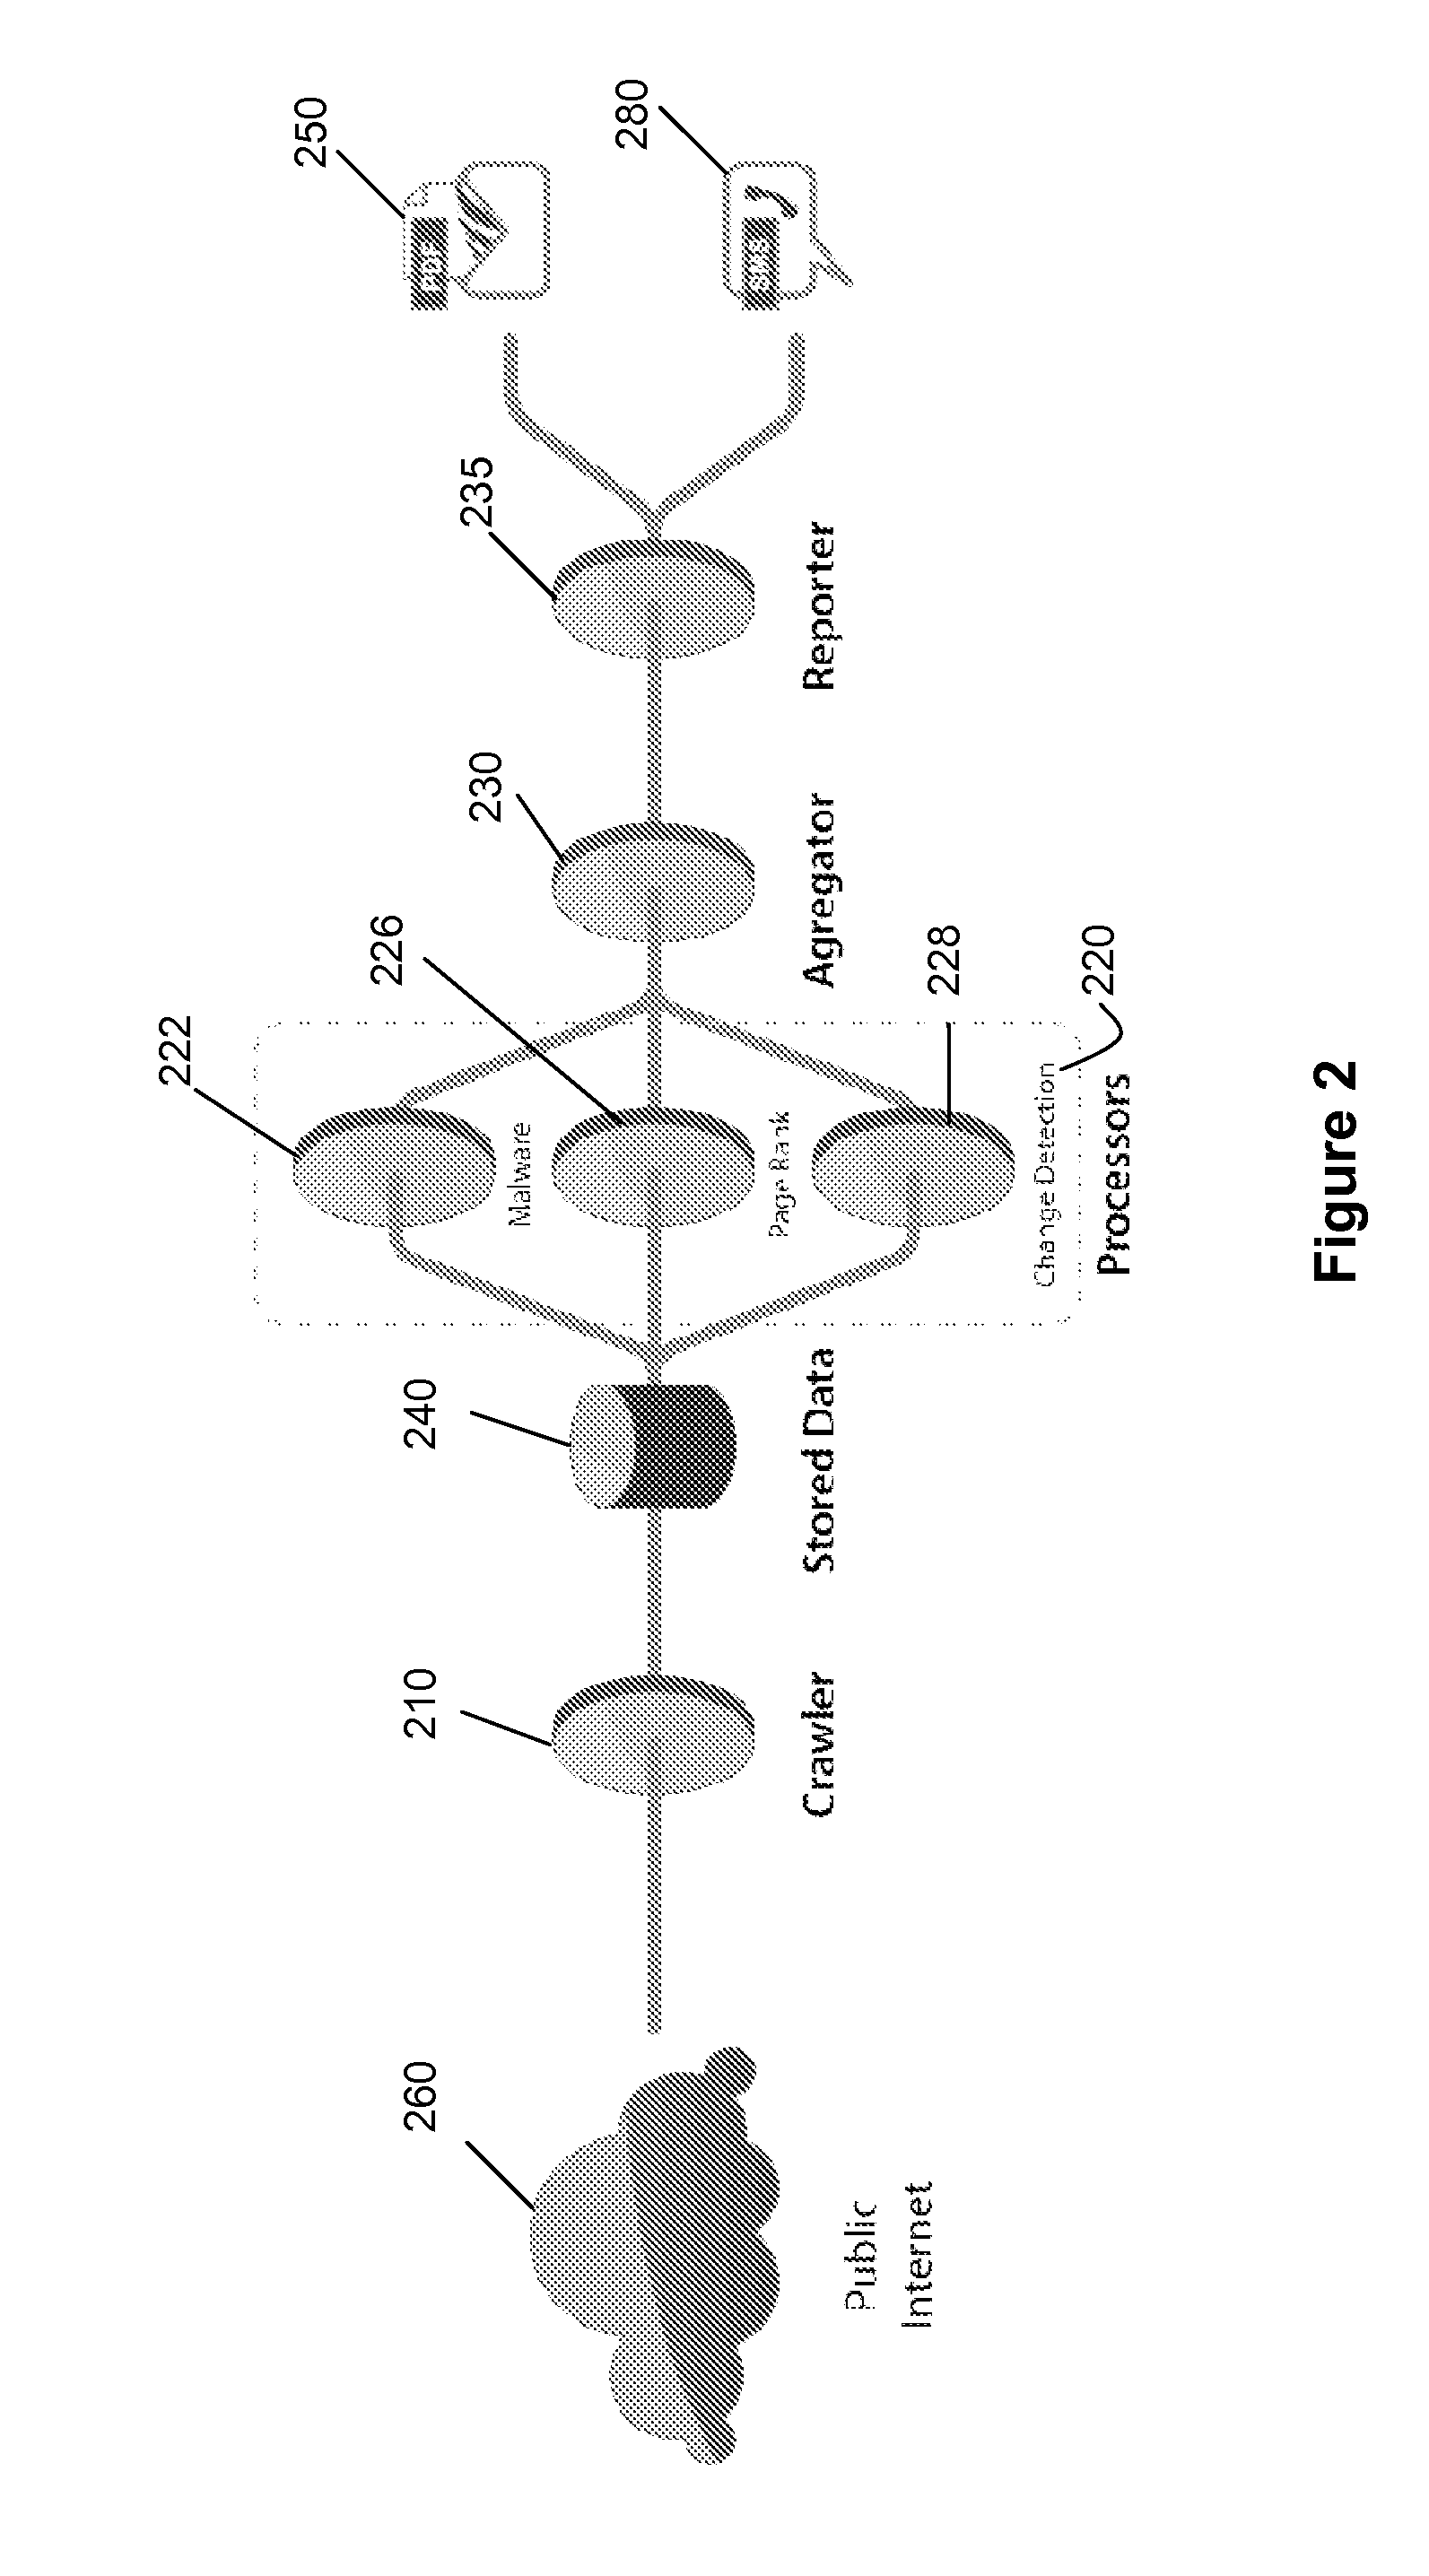 Web site analysis system and method